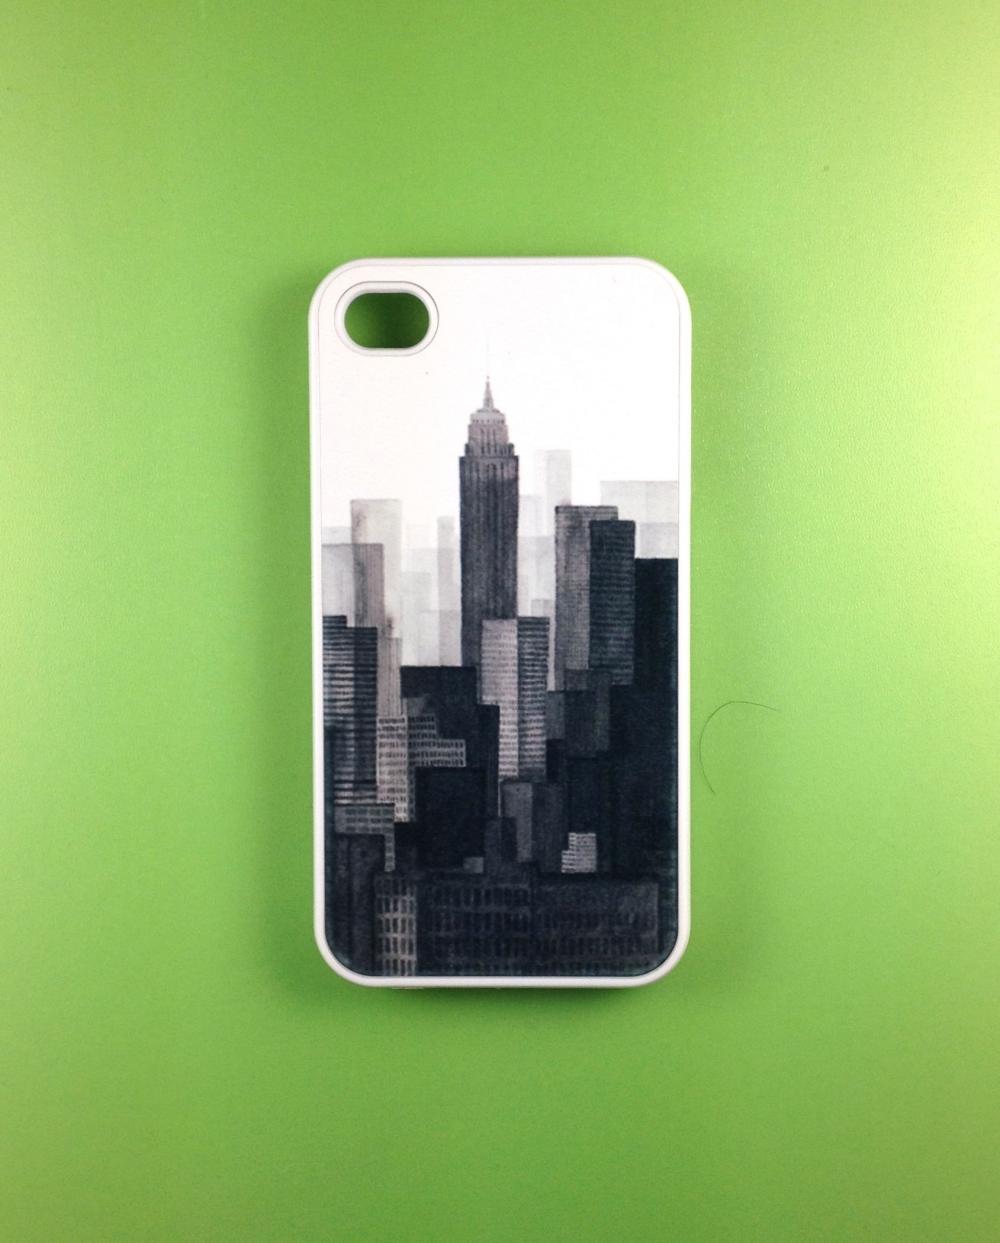 Iphone 4 Case - Vintage Ny City Iphone 4s Case, Iphone Case, Iphone 4 Cover